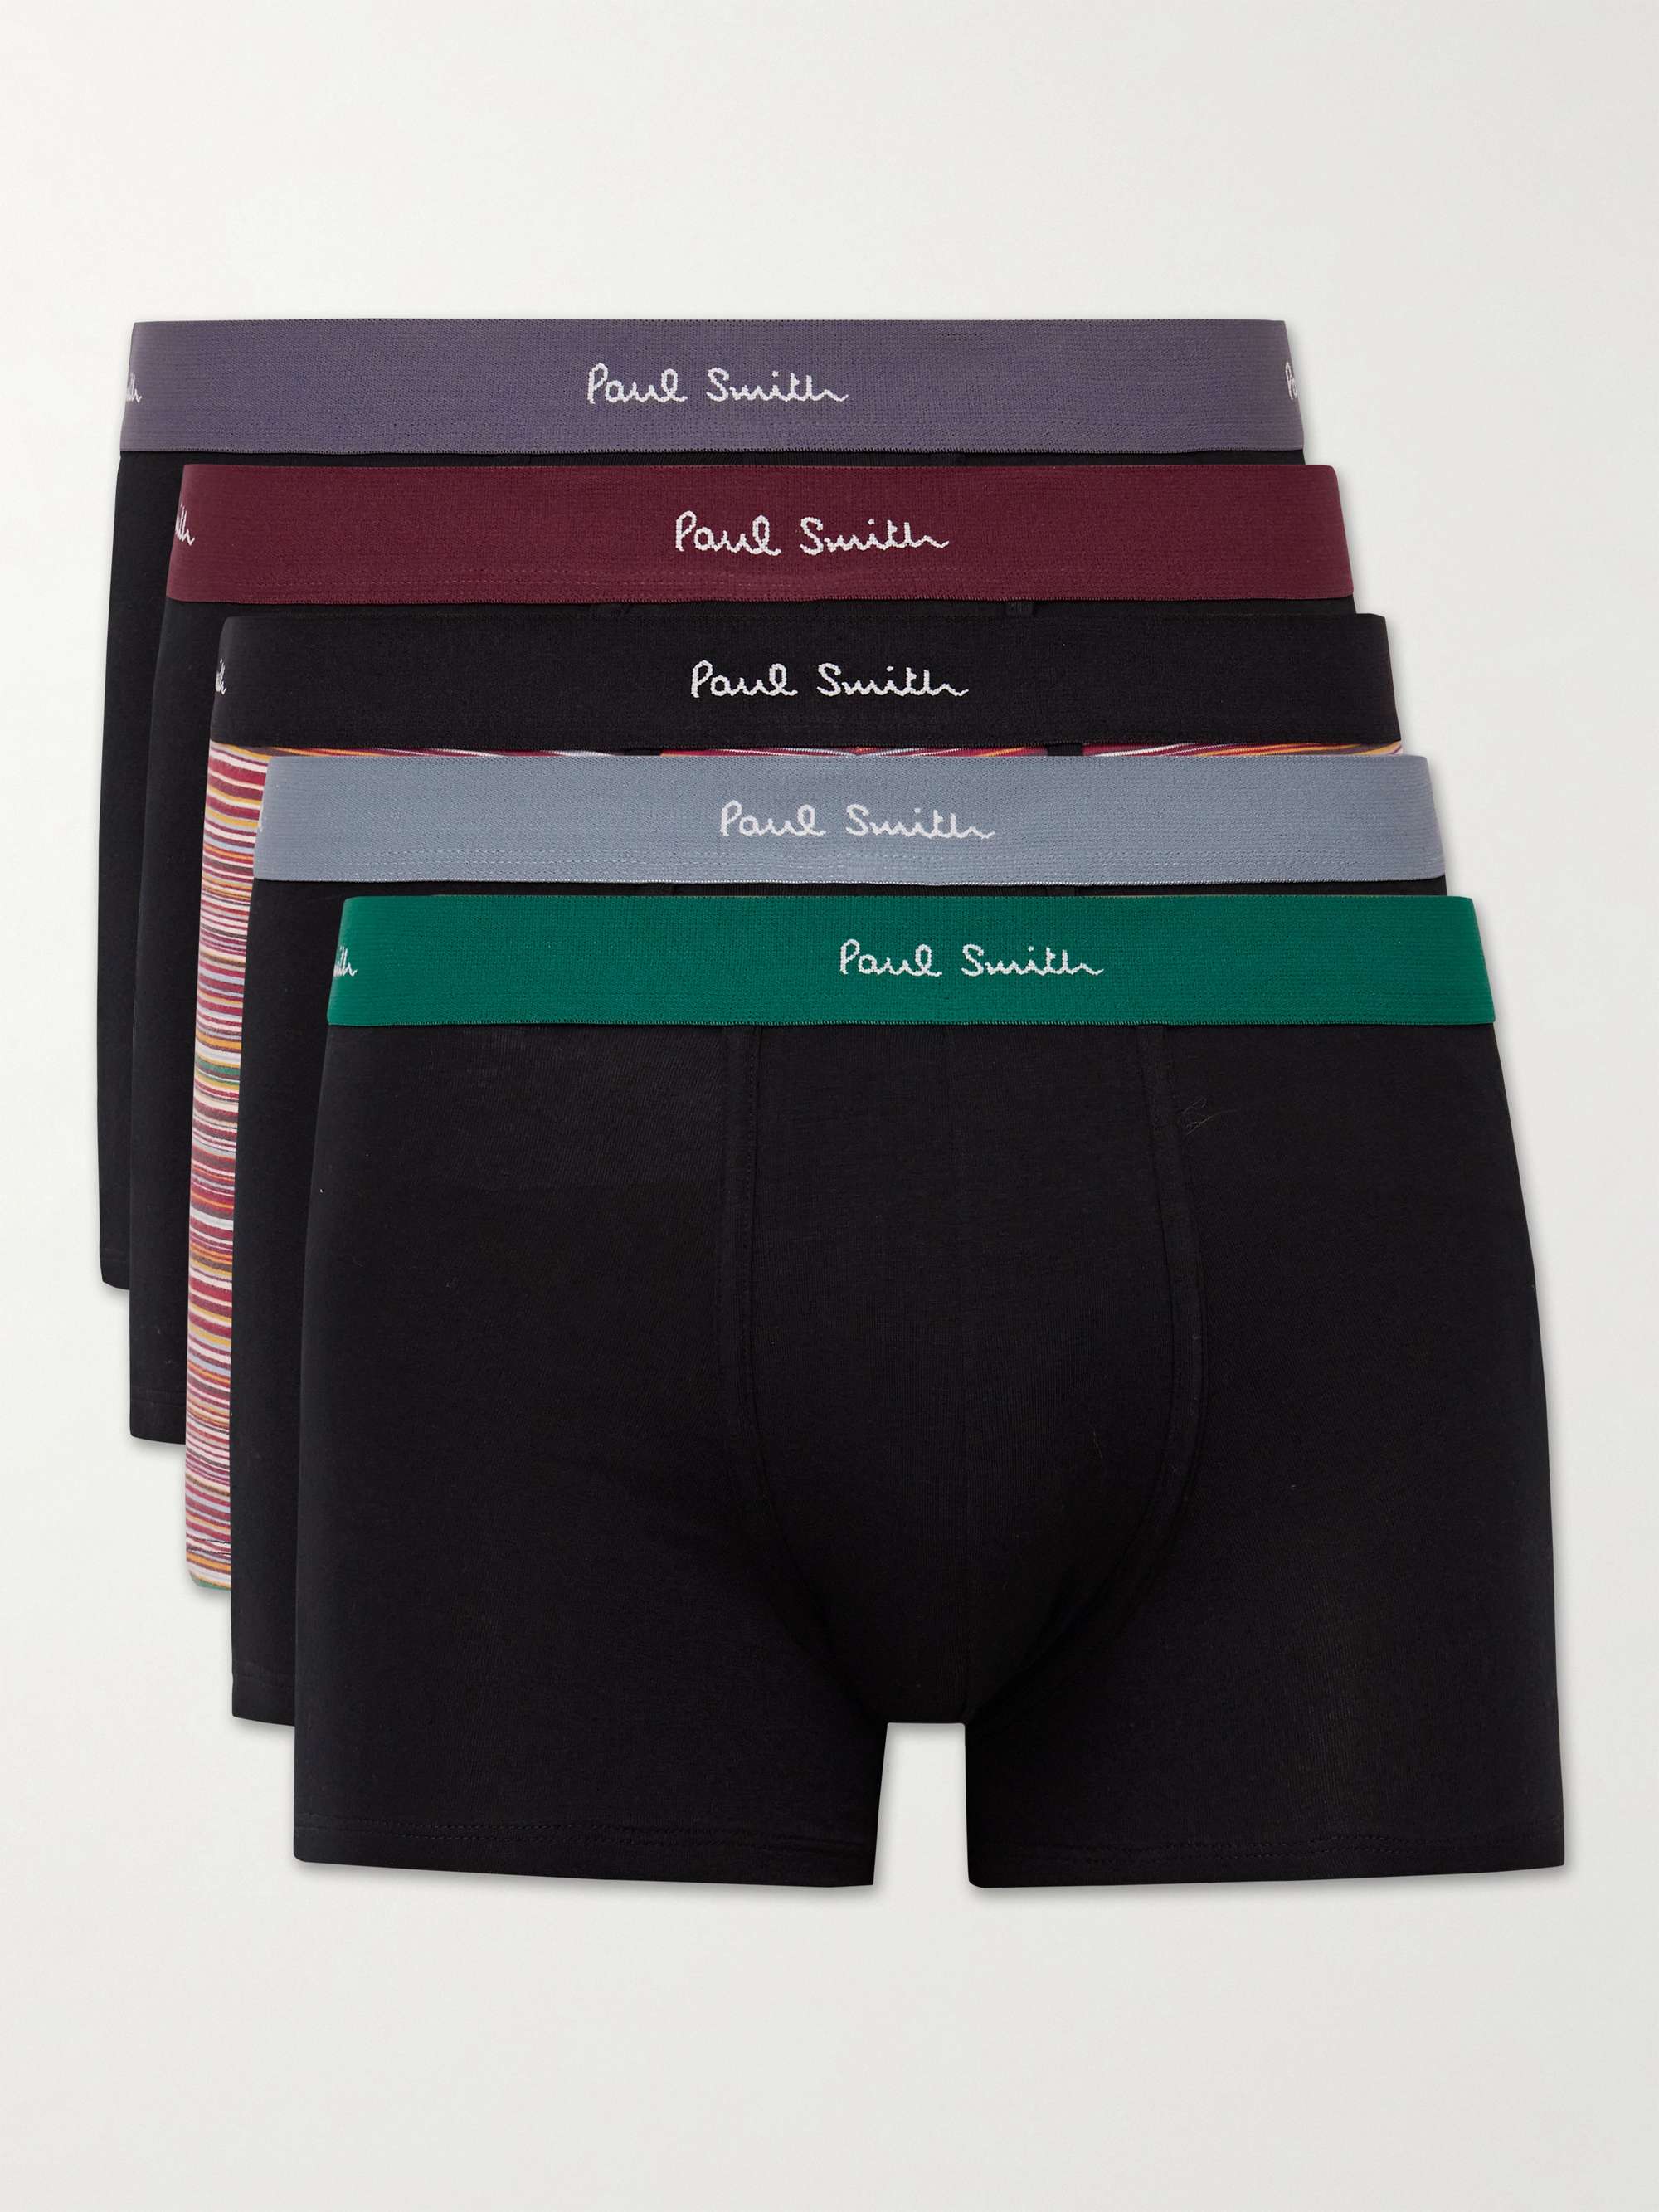 PAUL SMITH Five-Pack Stretch Organic Cotton Boxer Briefs for Men